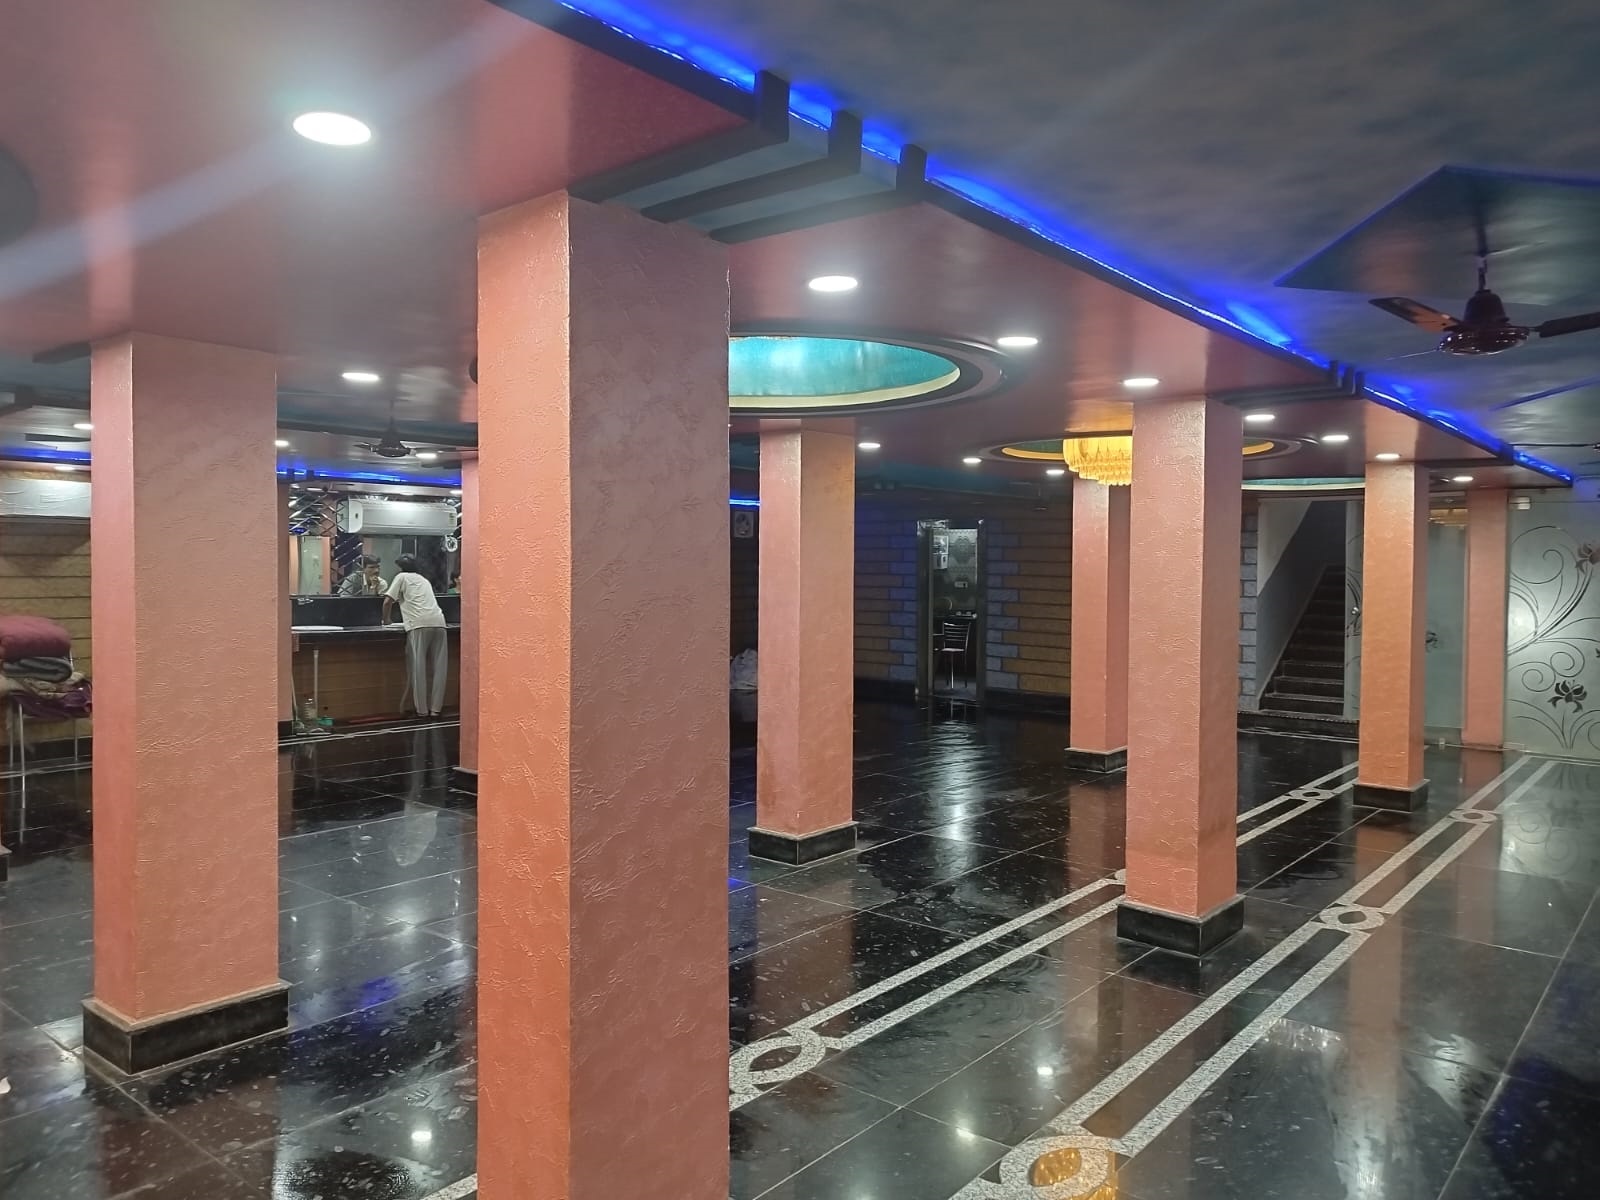 Best hotels near by patna junction, best hotels in kankarbagh